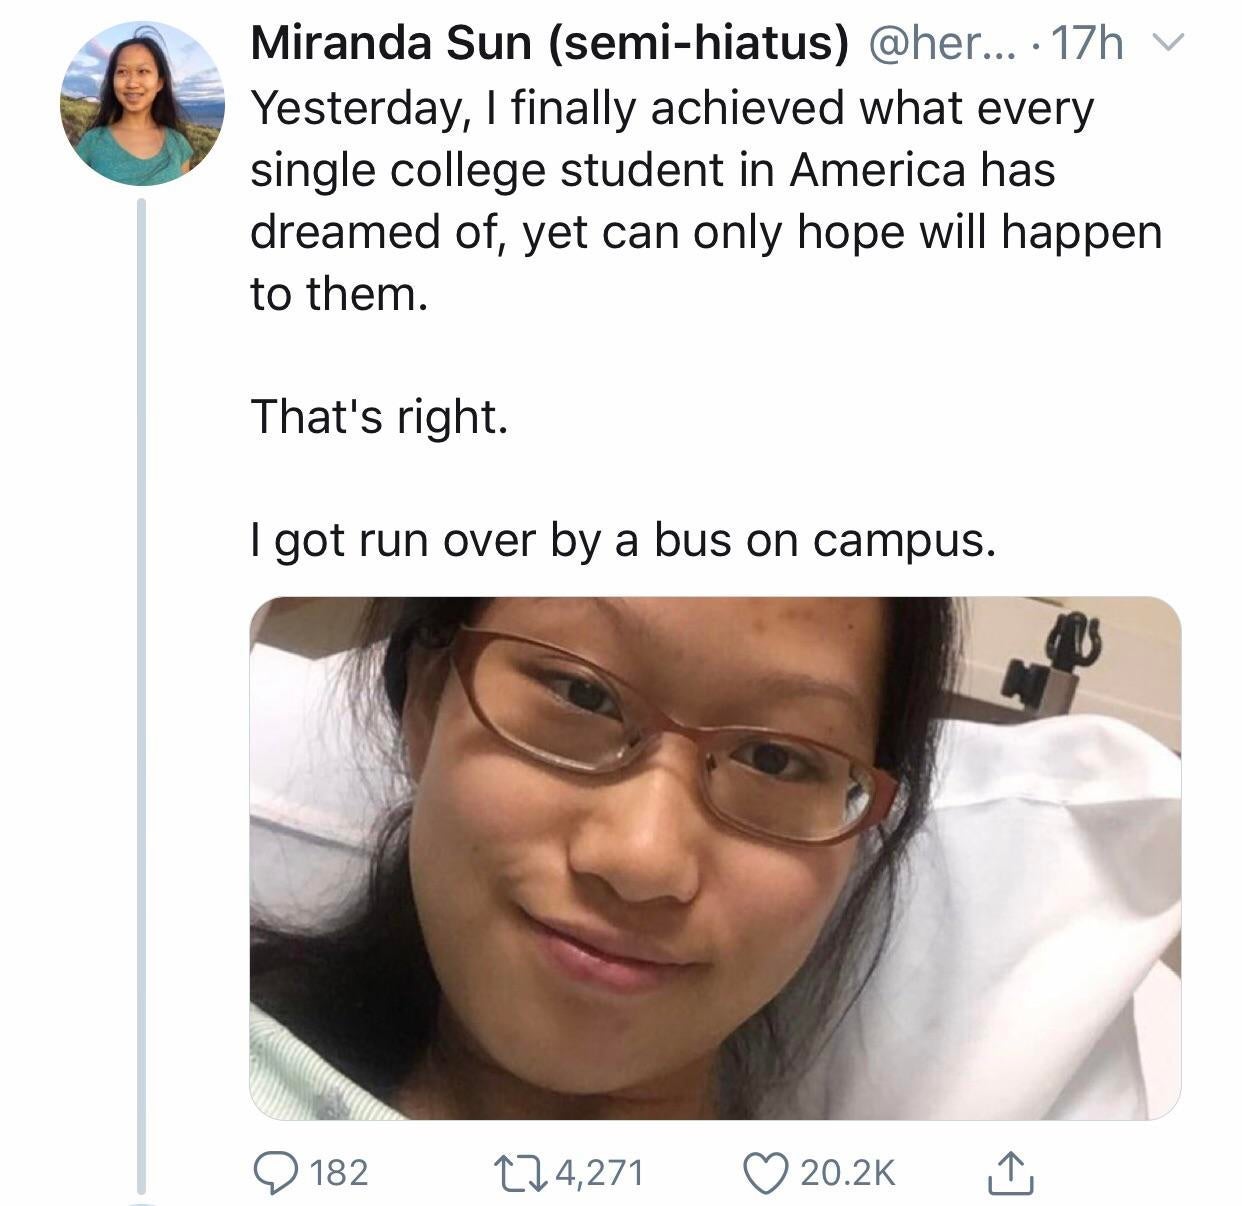 hit by a bus on campus - Miranda Sun semihiatus ... 17h v Yesterday, I finally achieved what every single college student in America has dreamed of, yet can only hope will happen to them. That's right. I got run over by a bus on campus. 182 224,271 1